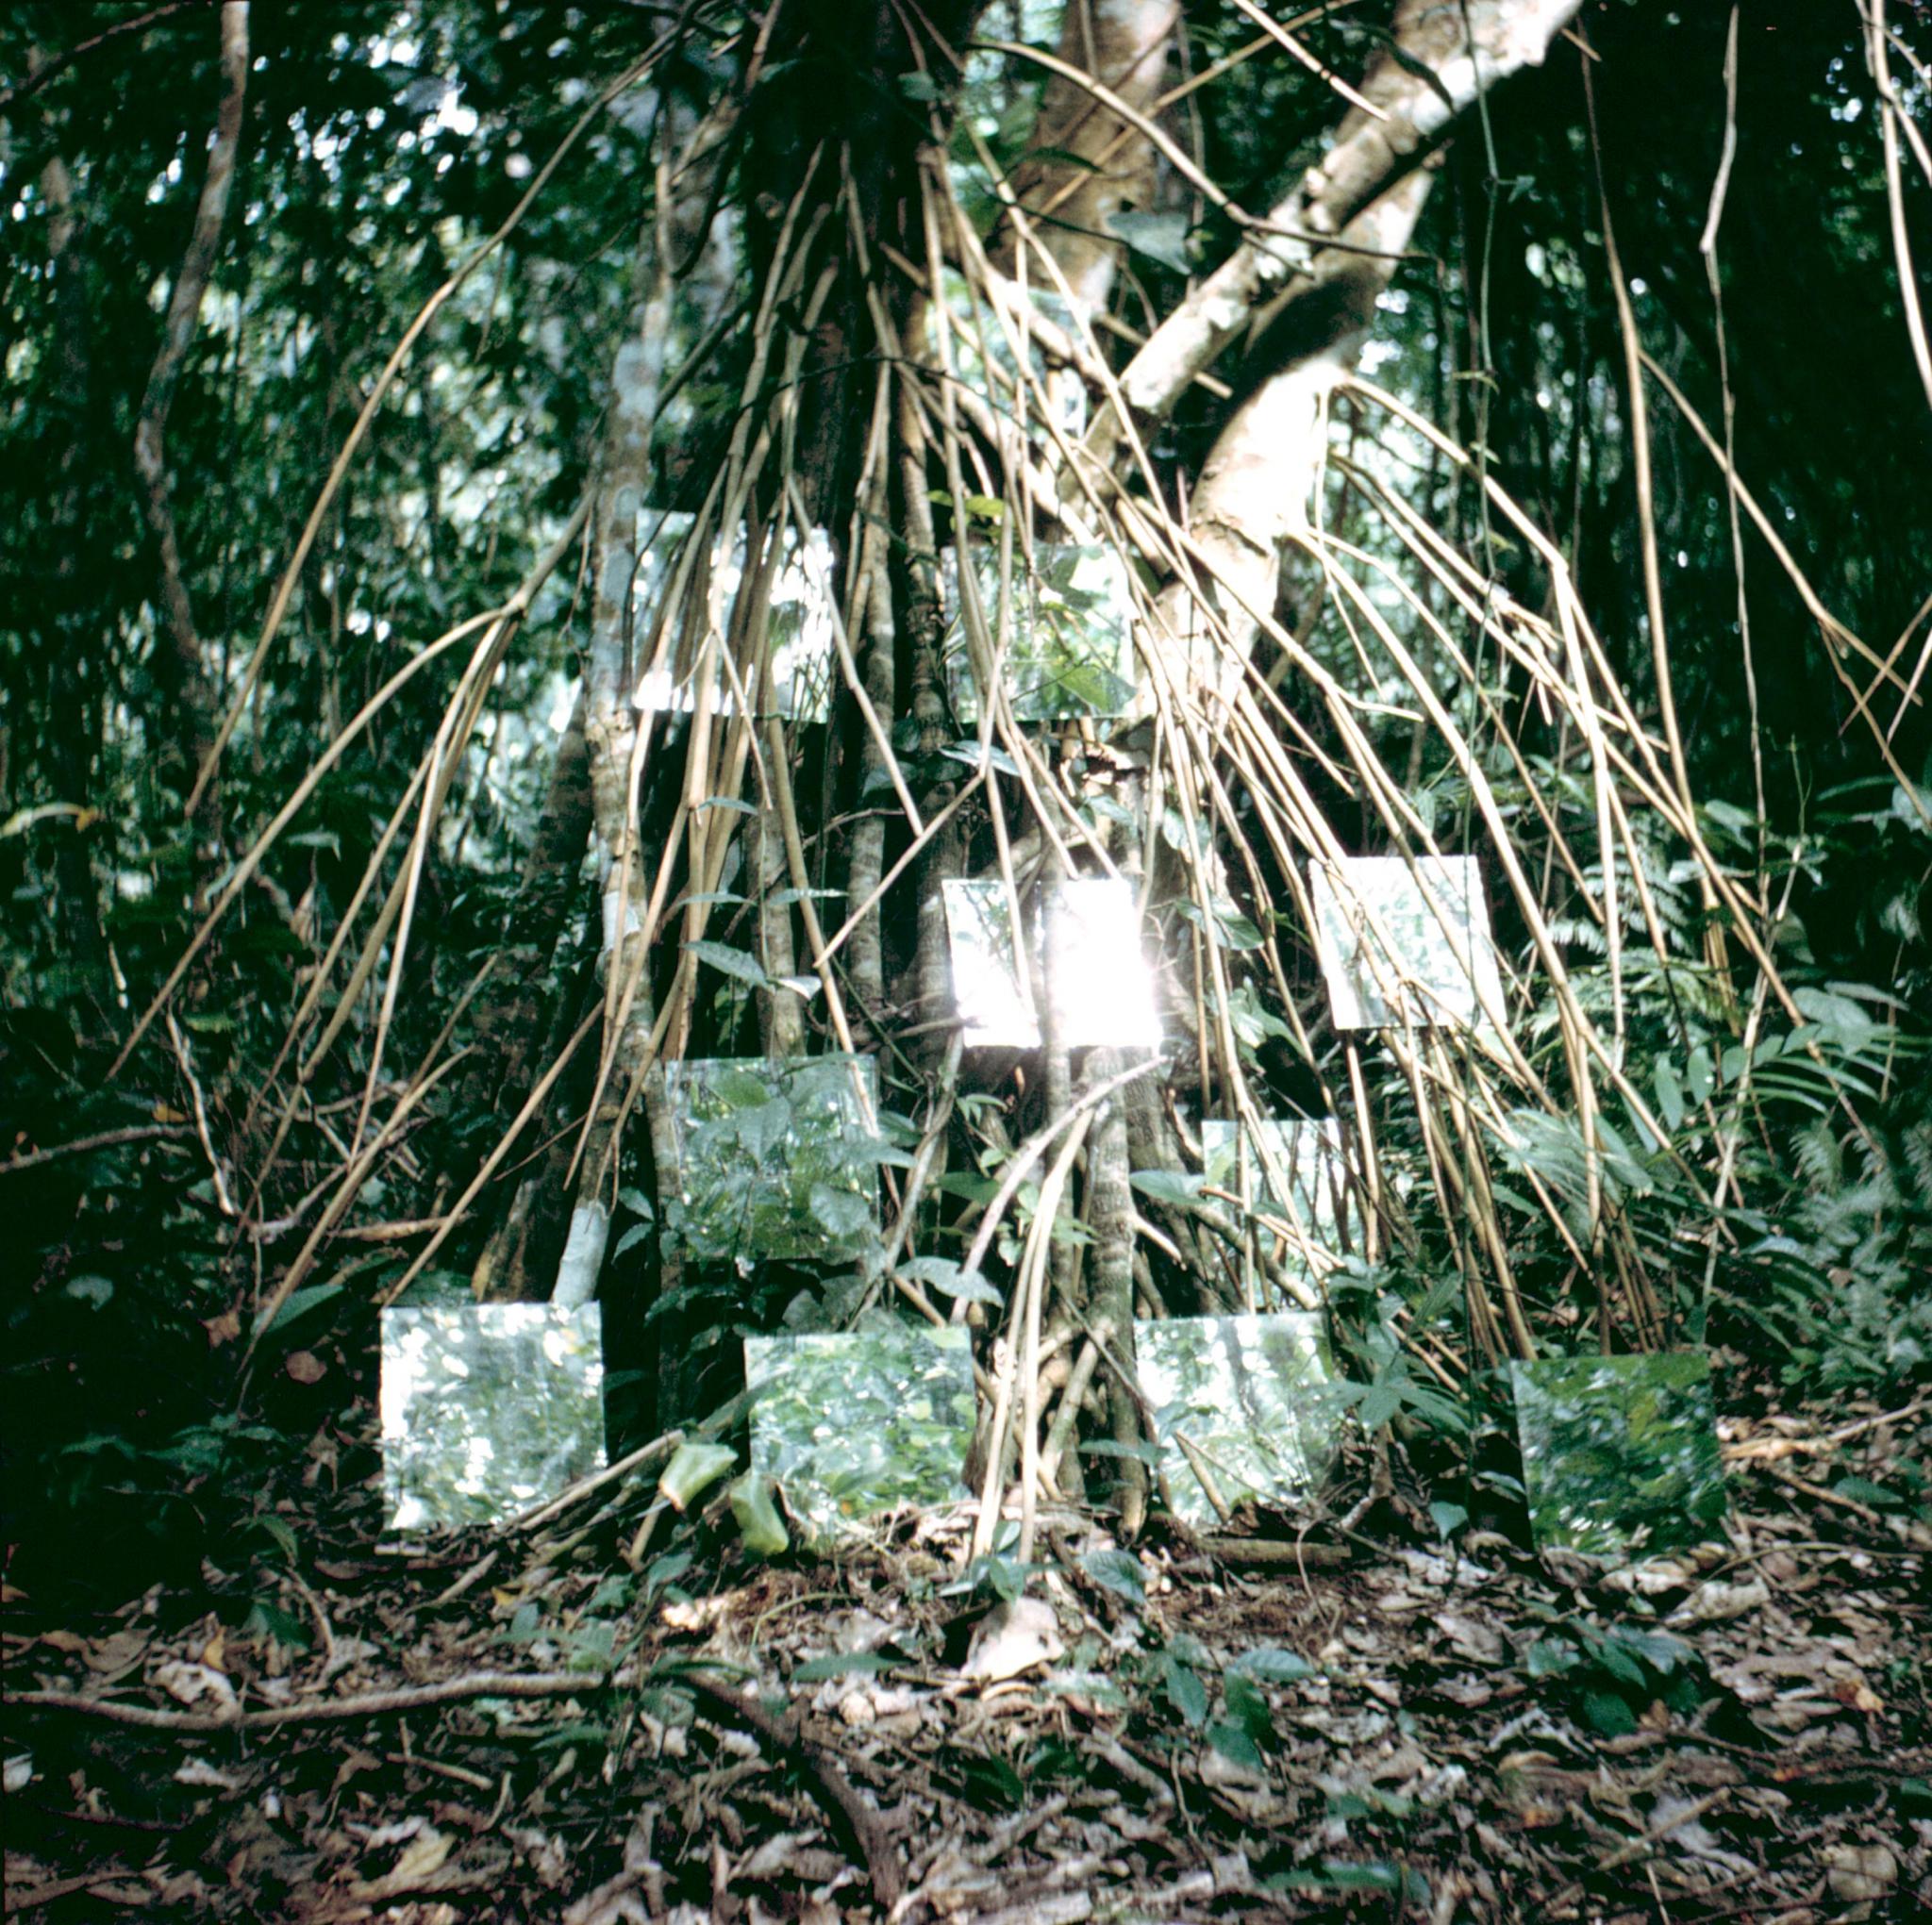 square mirrors placed in the branches of a tropical tree